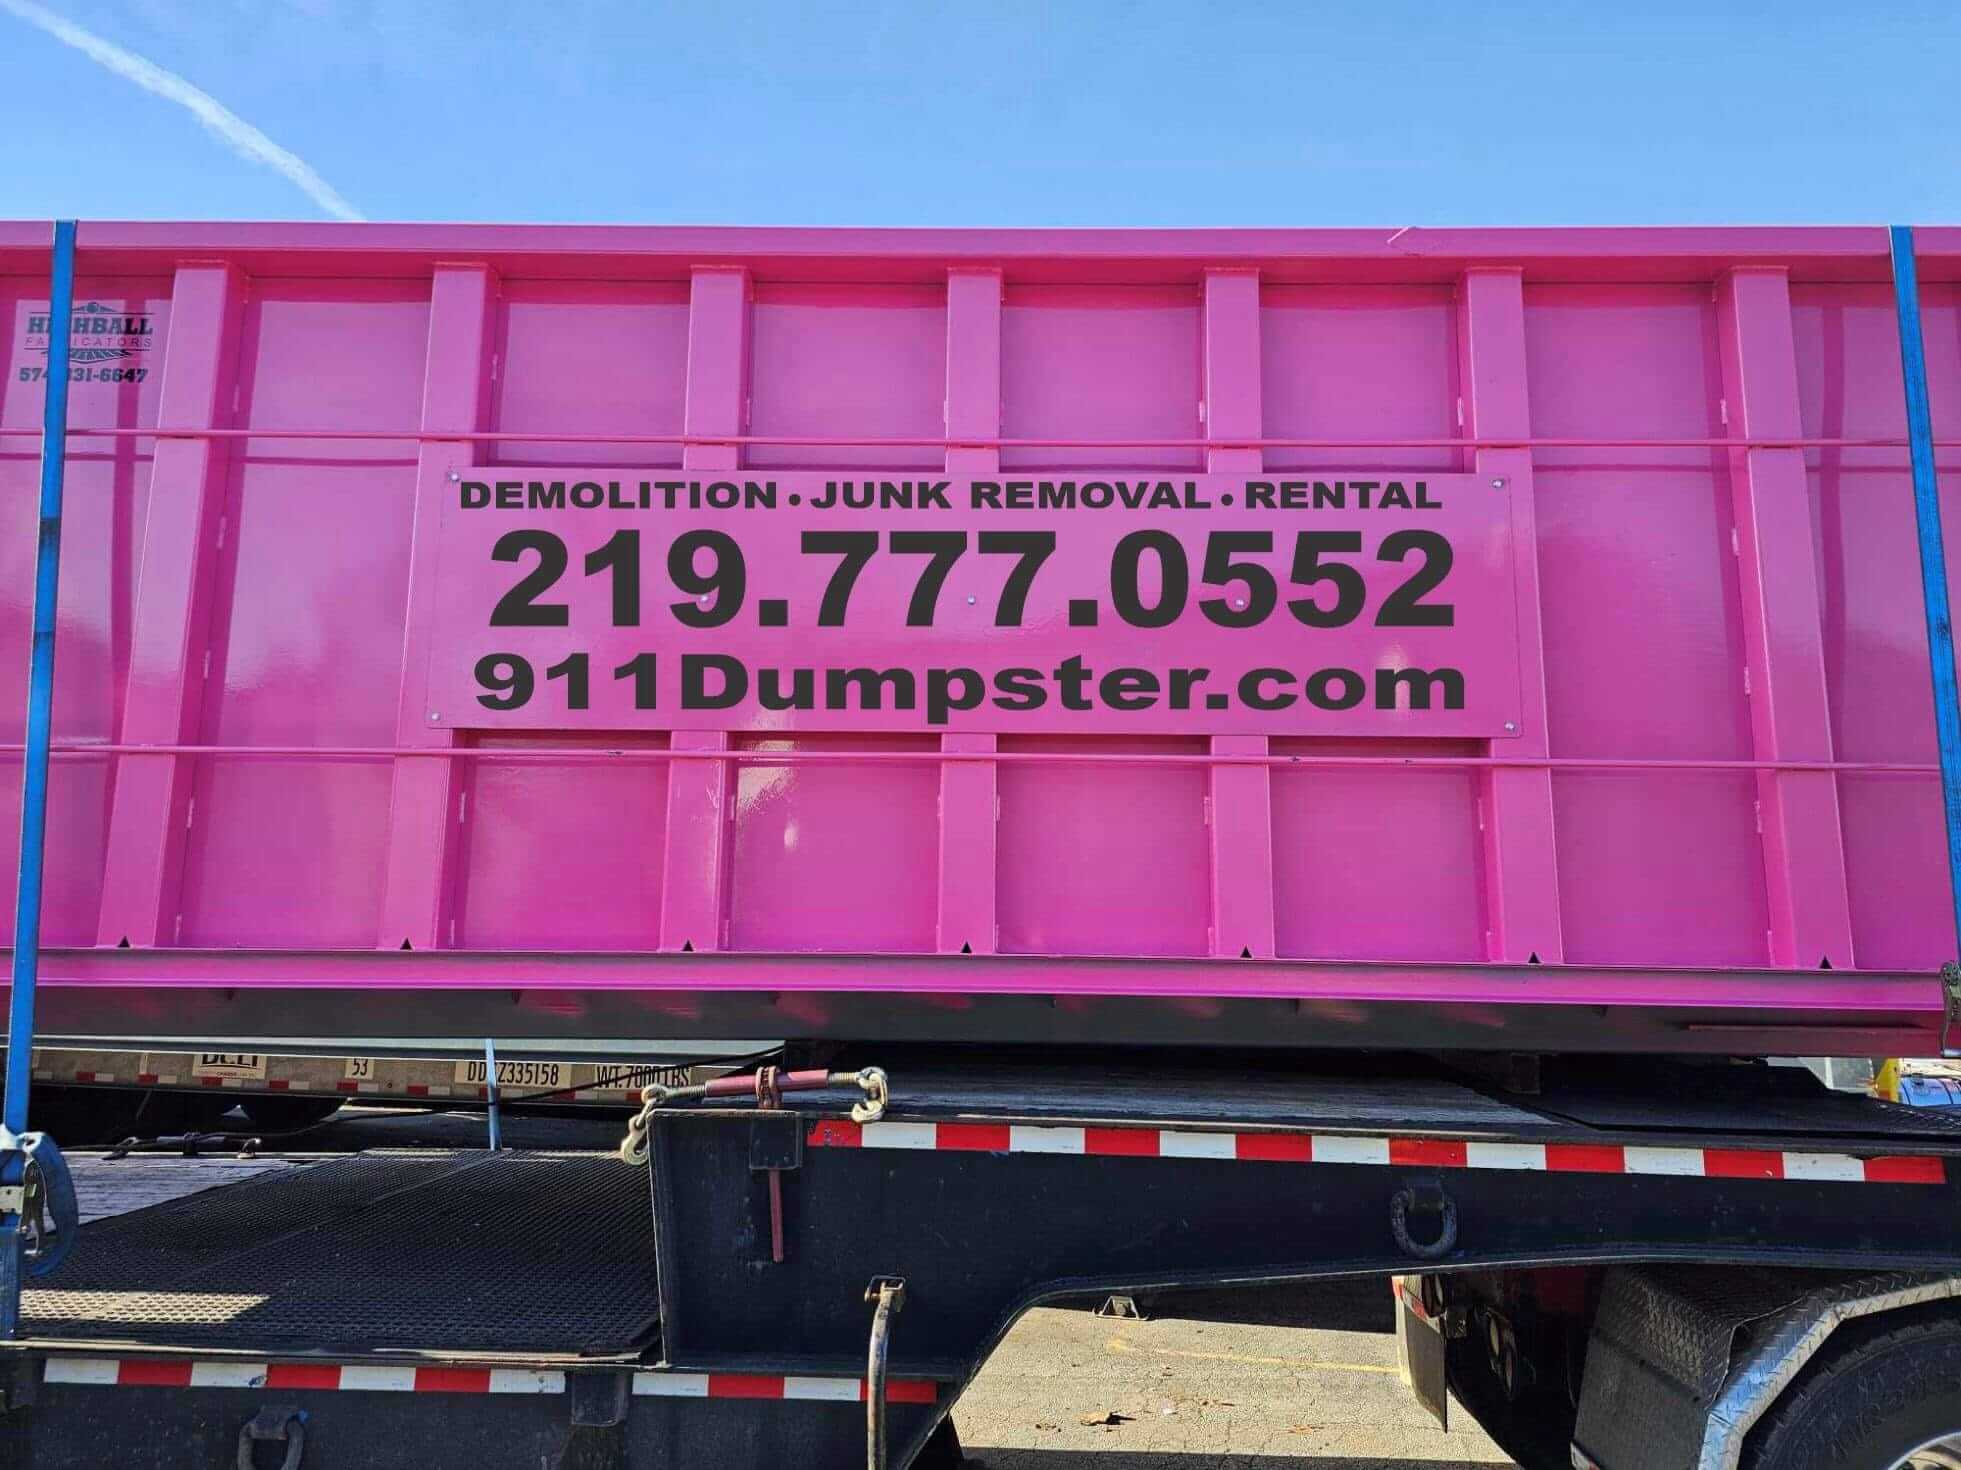 Vivid pink commercial dumpster with demolition, junk removal, and rental services listed, contact number 219.777.0552 and website 911Dumpster.com prominently displayed, available in Lake, Porter, and LaPorte County, Indiana